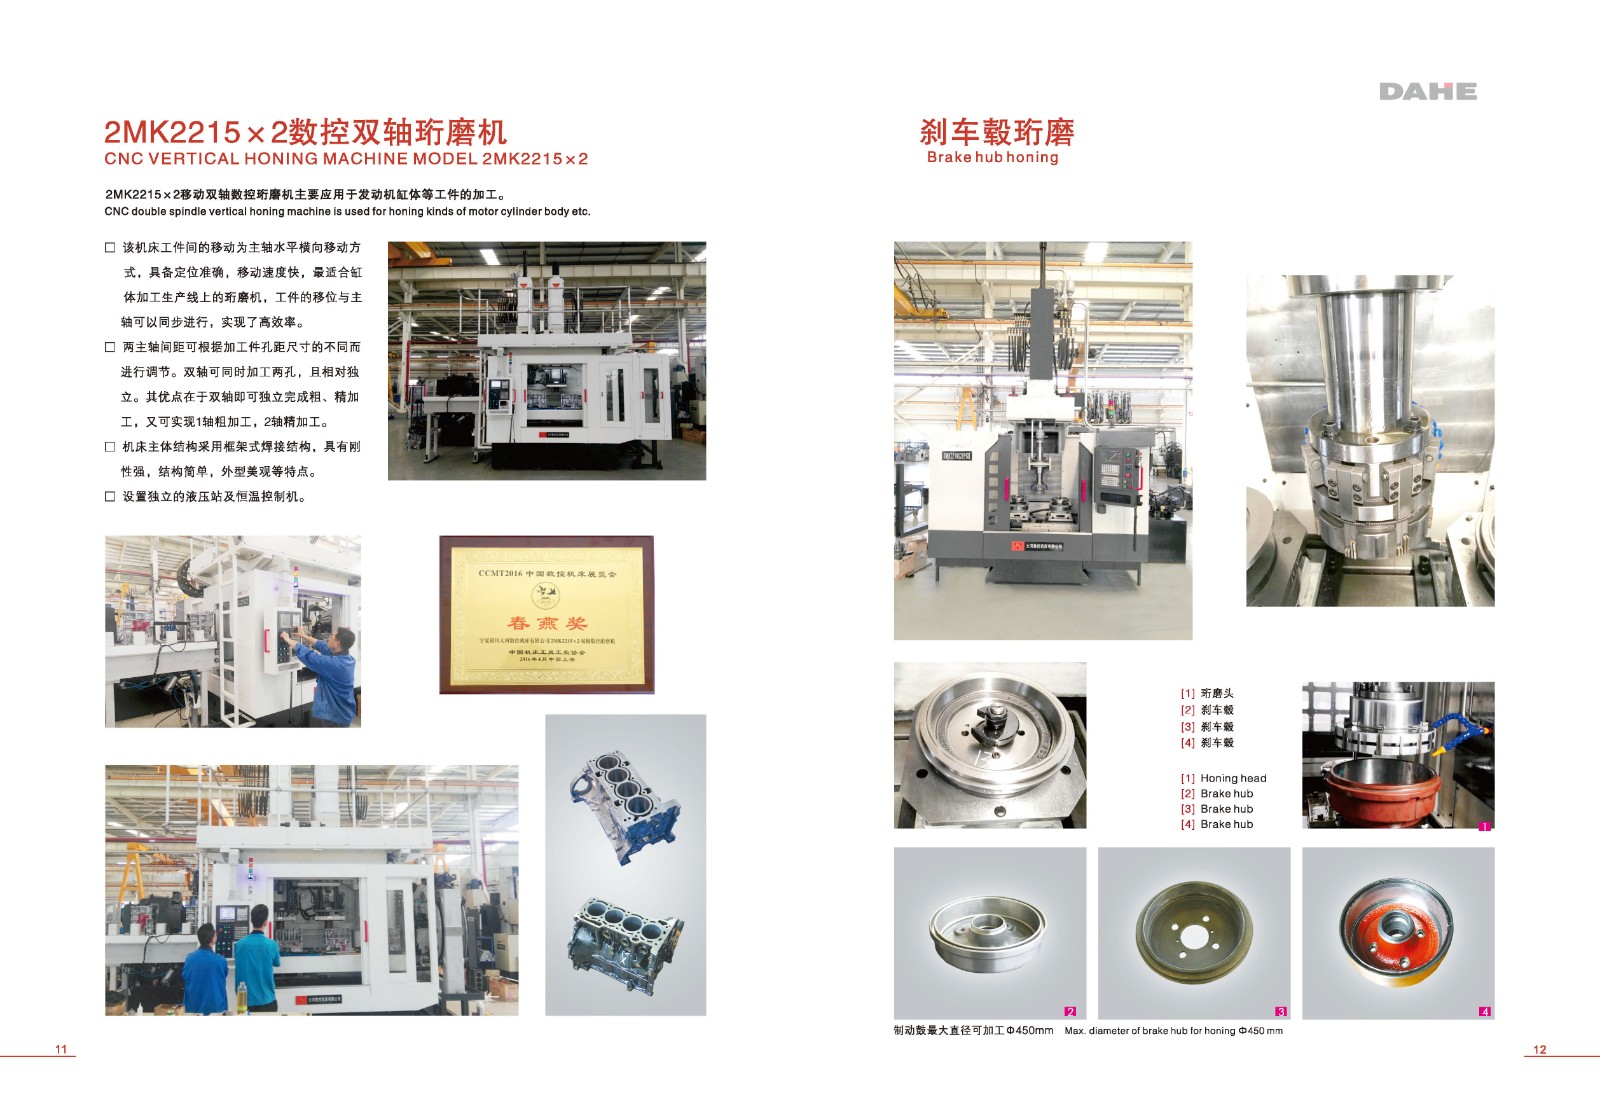 CNC DOUBLE AXIS HONING MACHINE